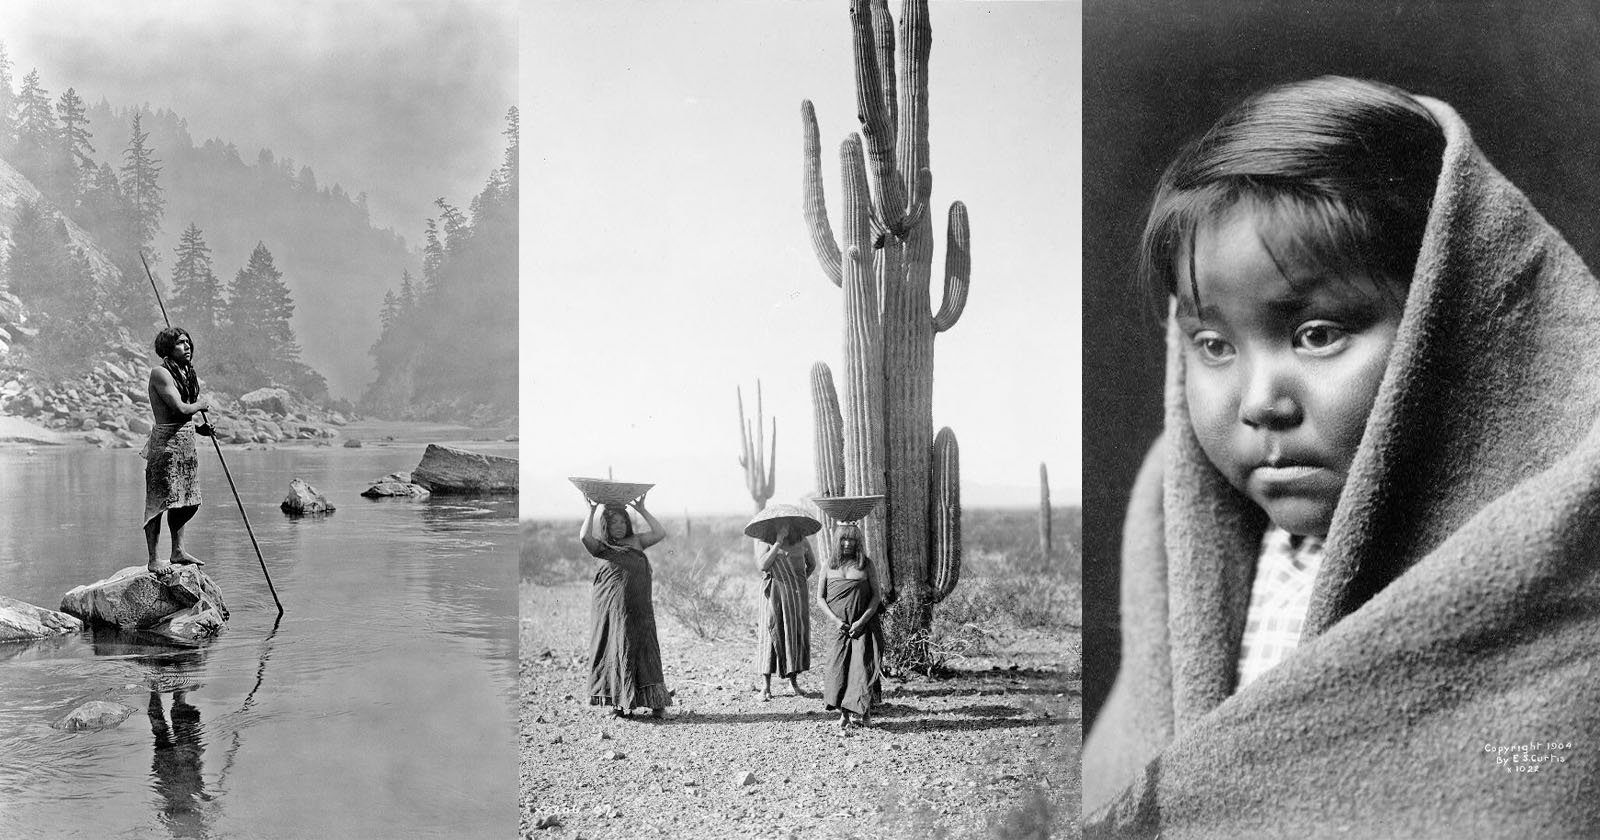 This Photographer Documented Native American Tribes Before They Vanished